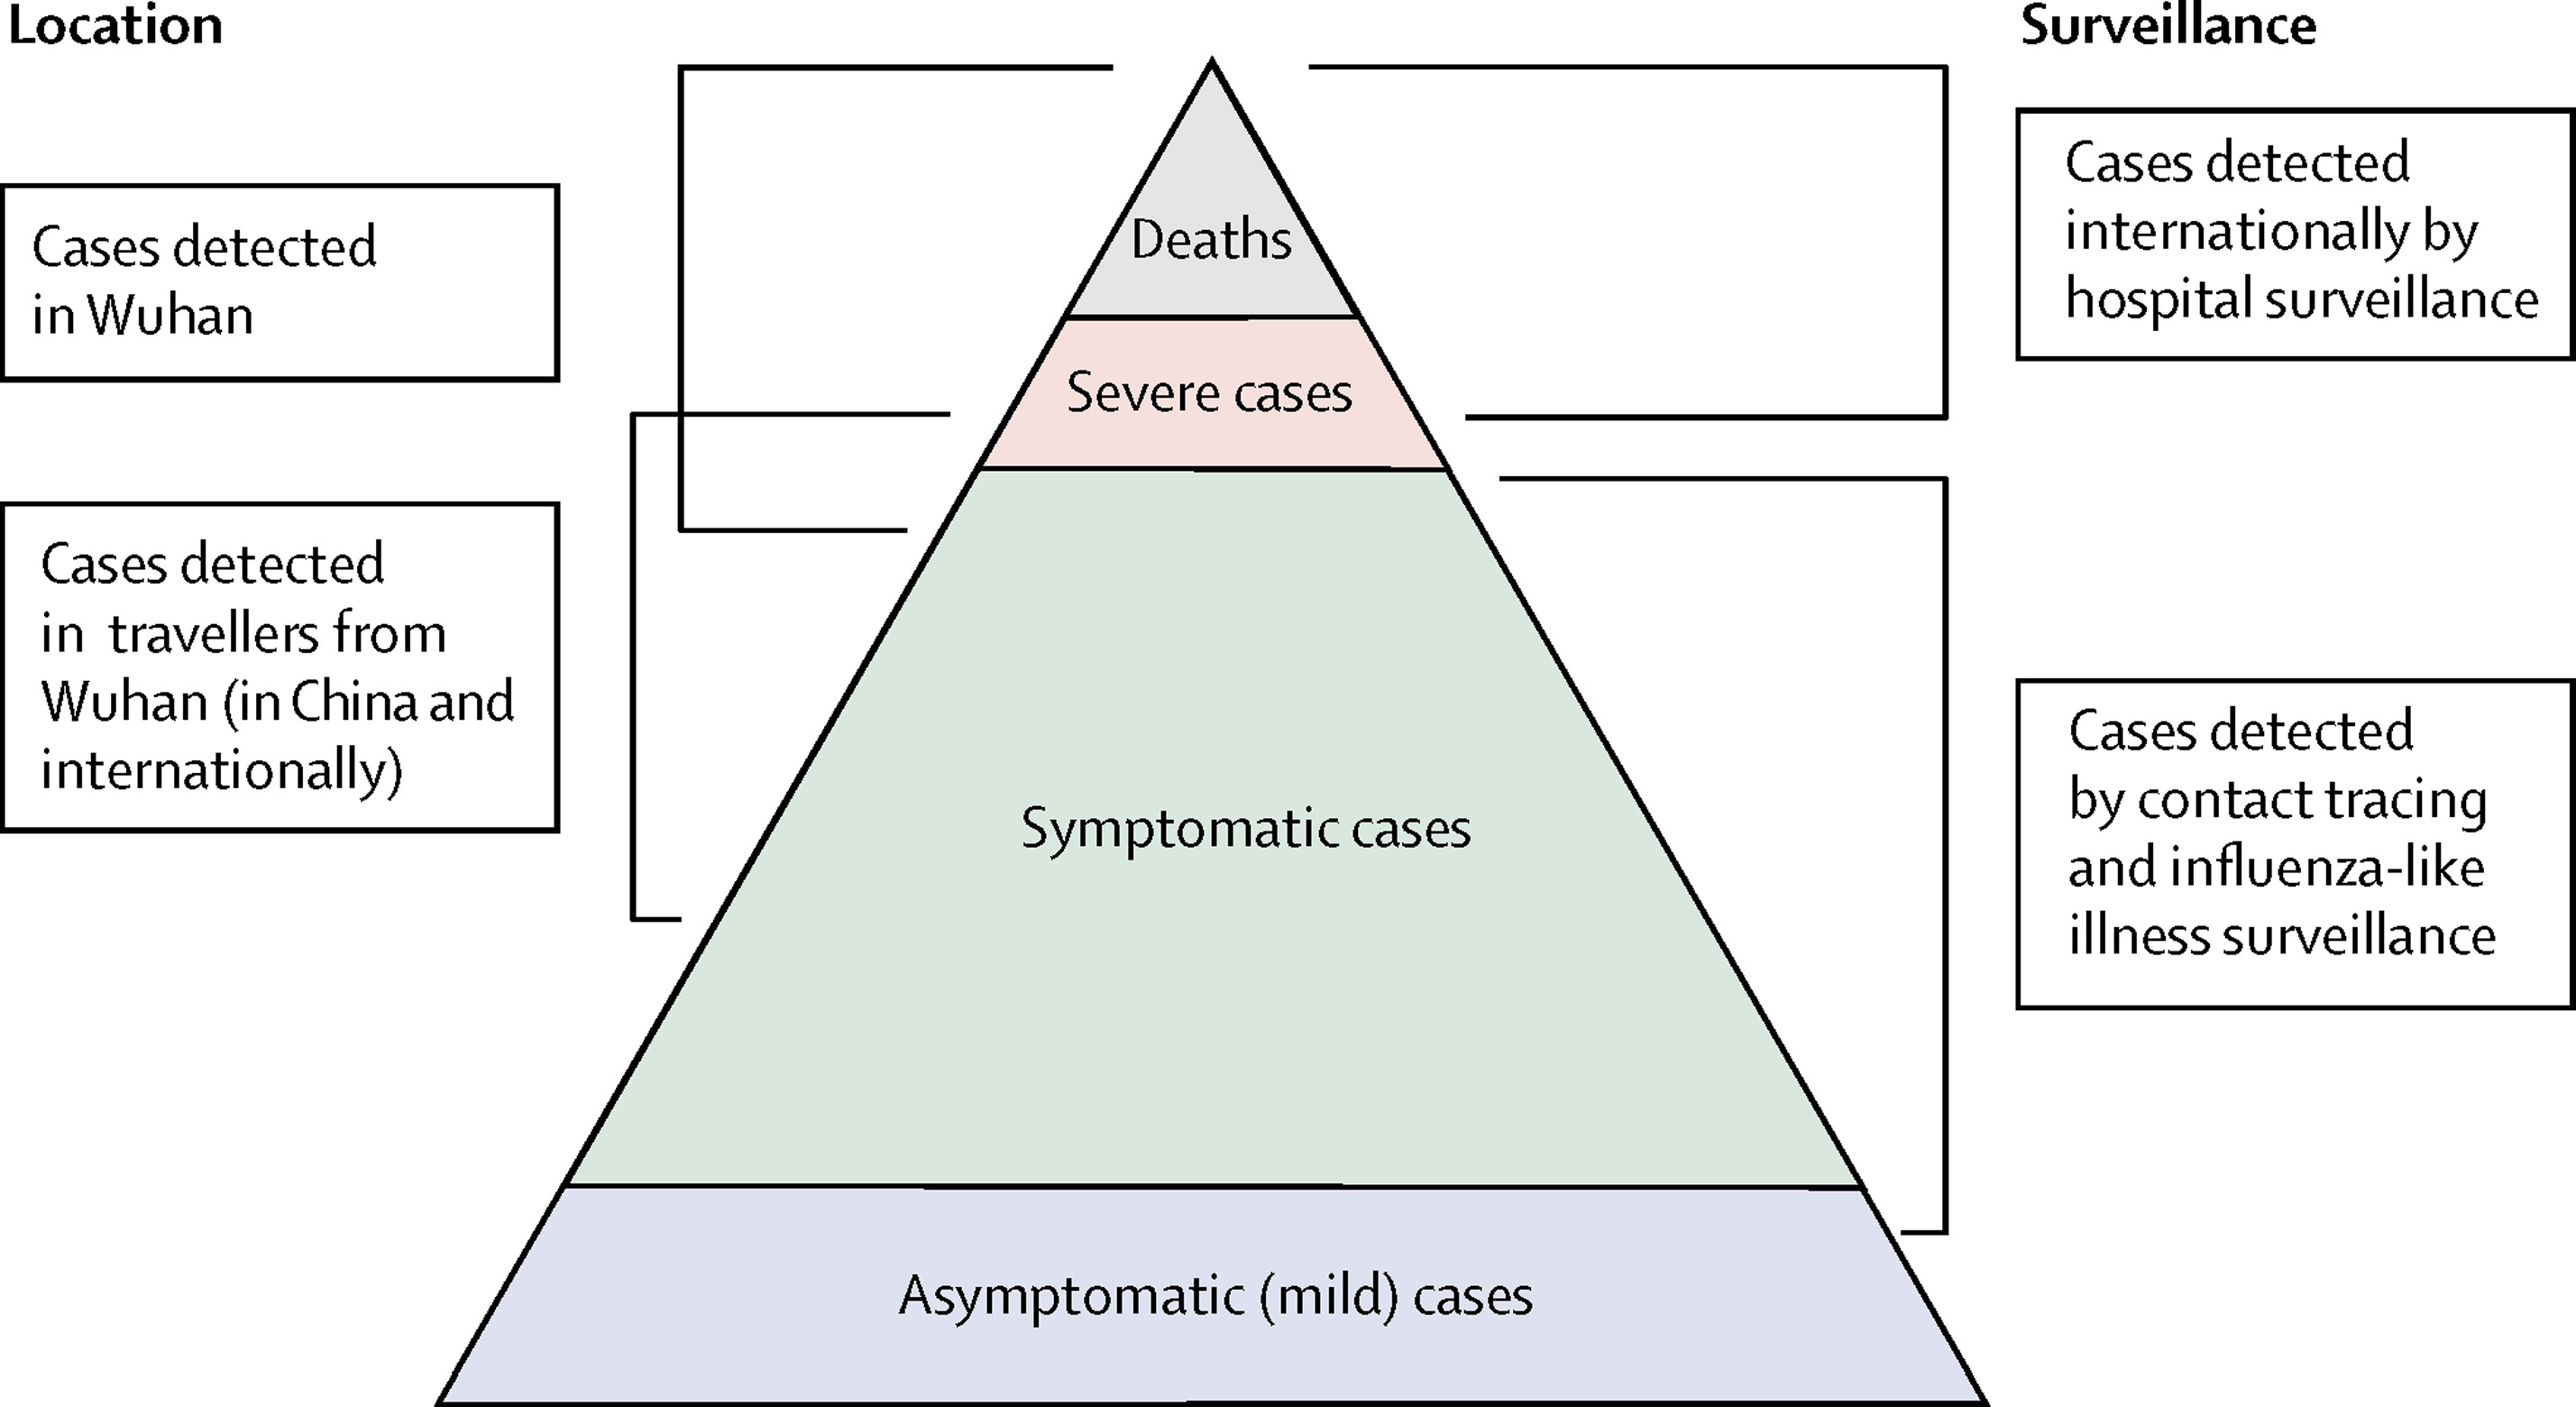 Spectrum of COVID-19 cases. The CFR aims to estimate the proportion of Deaths among confirmed cases in an epidemic. (Verity et al., 2020)